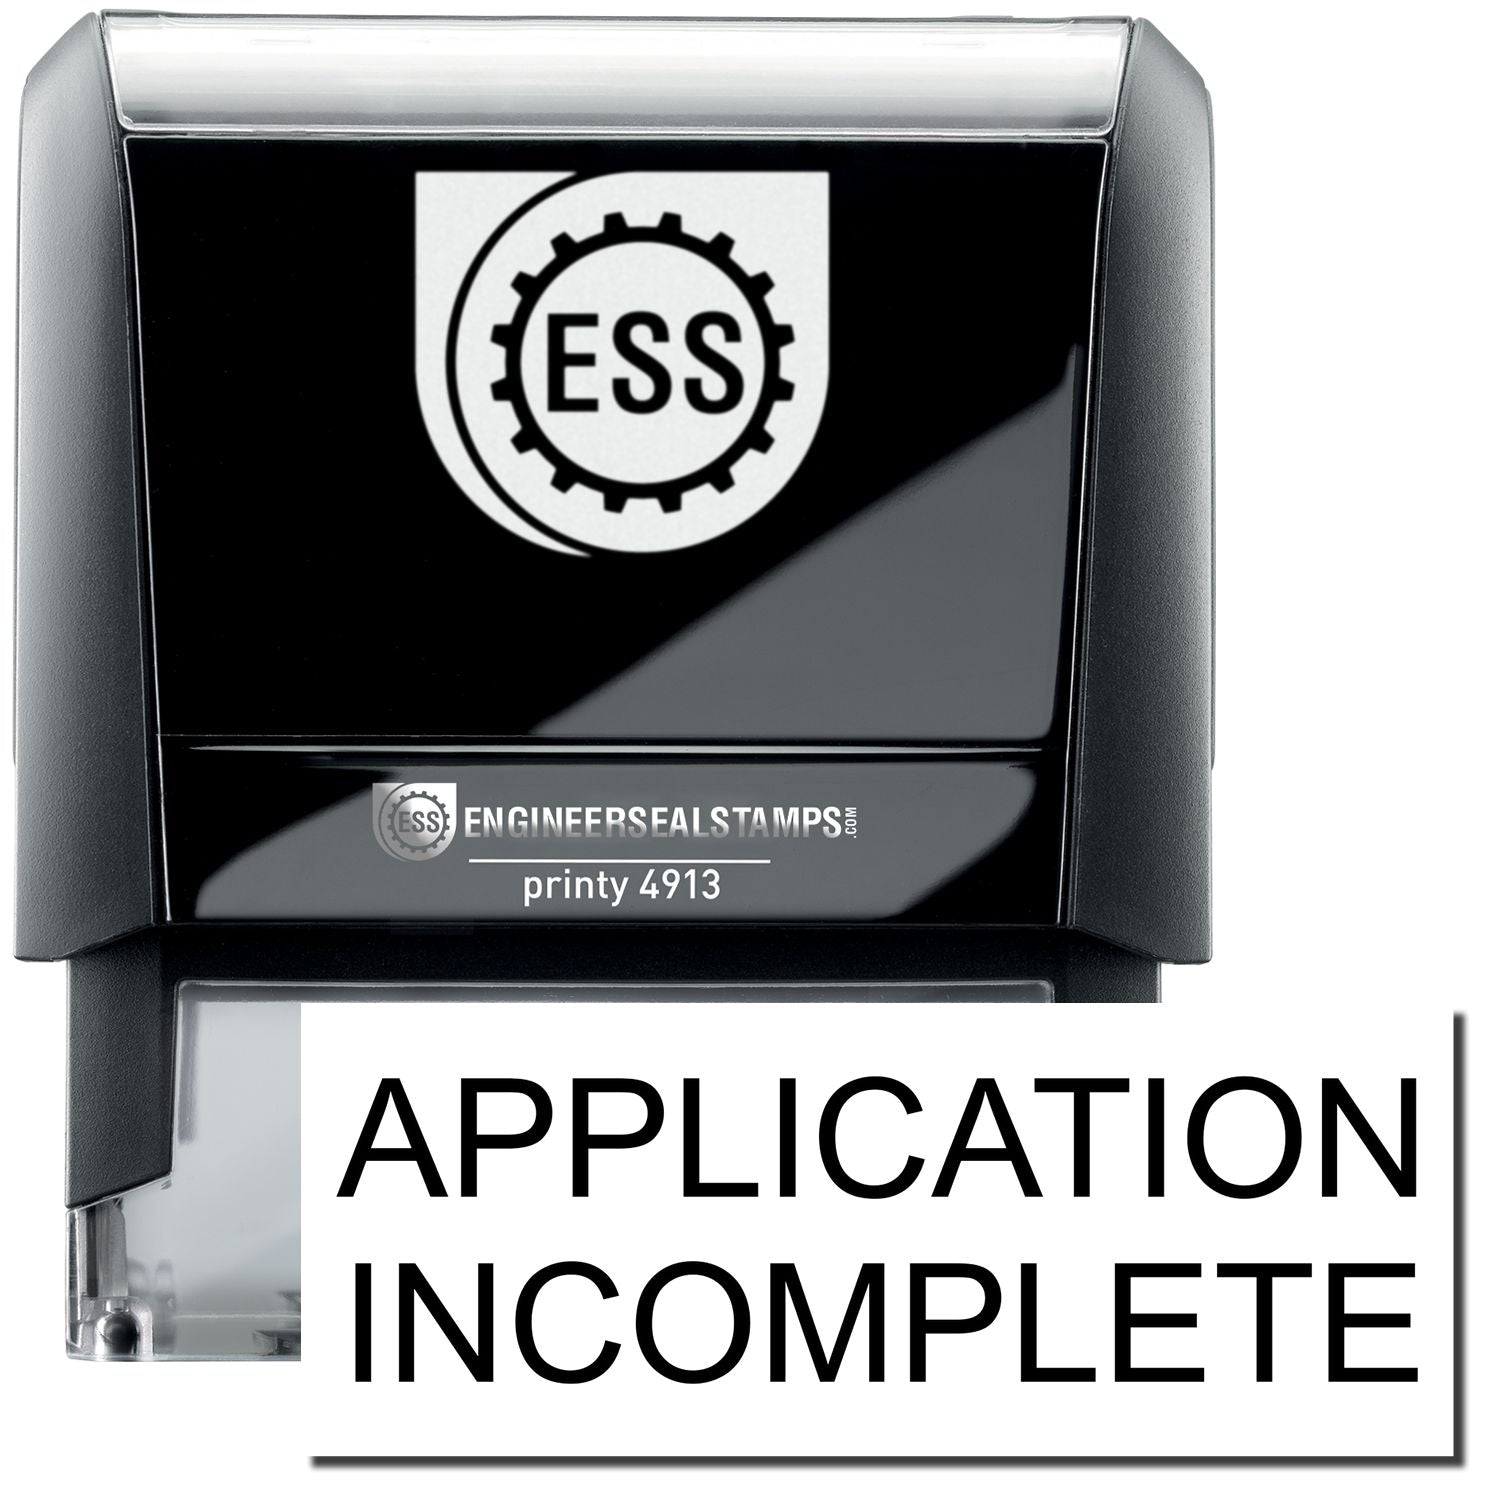 A self-inking stamp with a stamped image showing how the text "APPLICATION INCOMPLETE" in a large bold font is displayed by it.